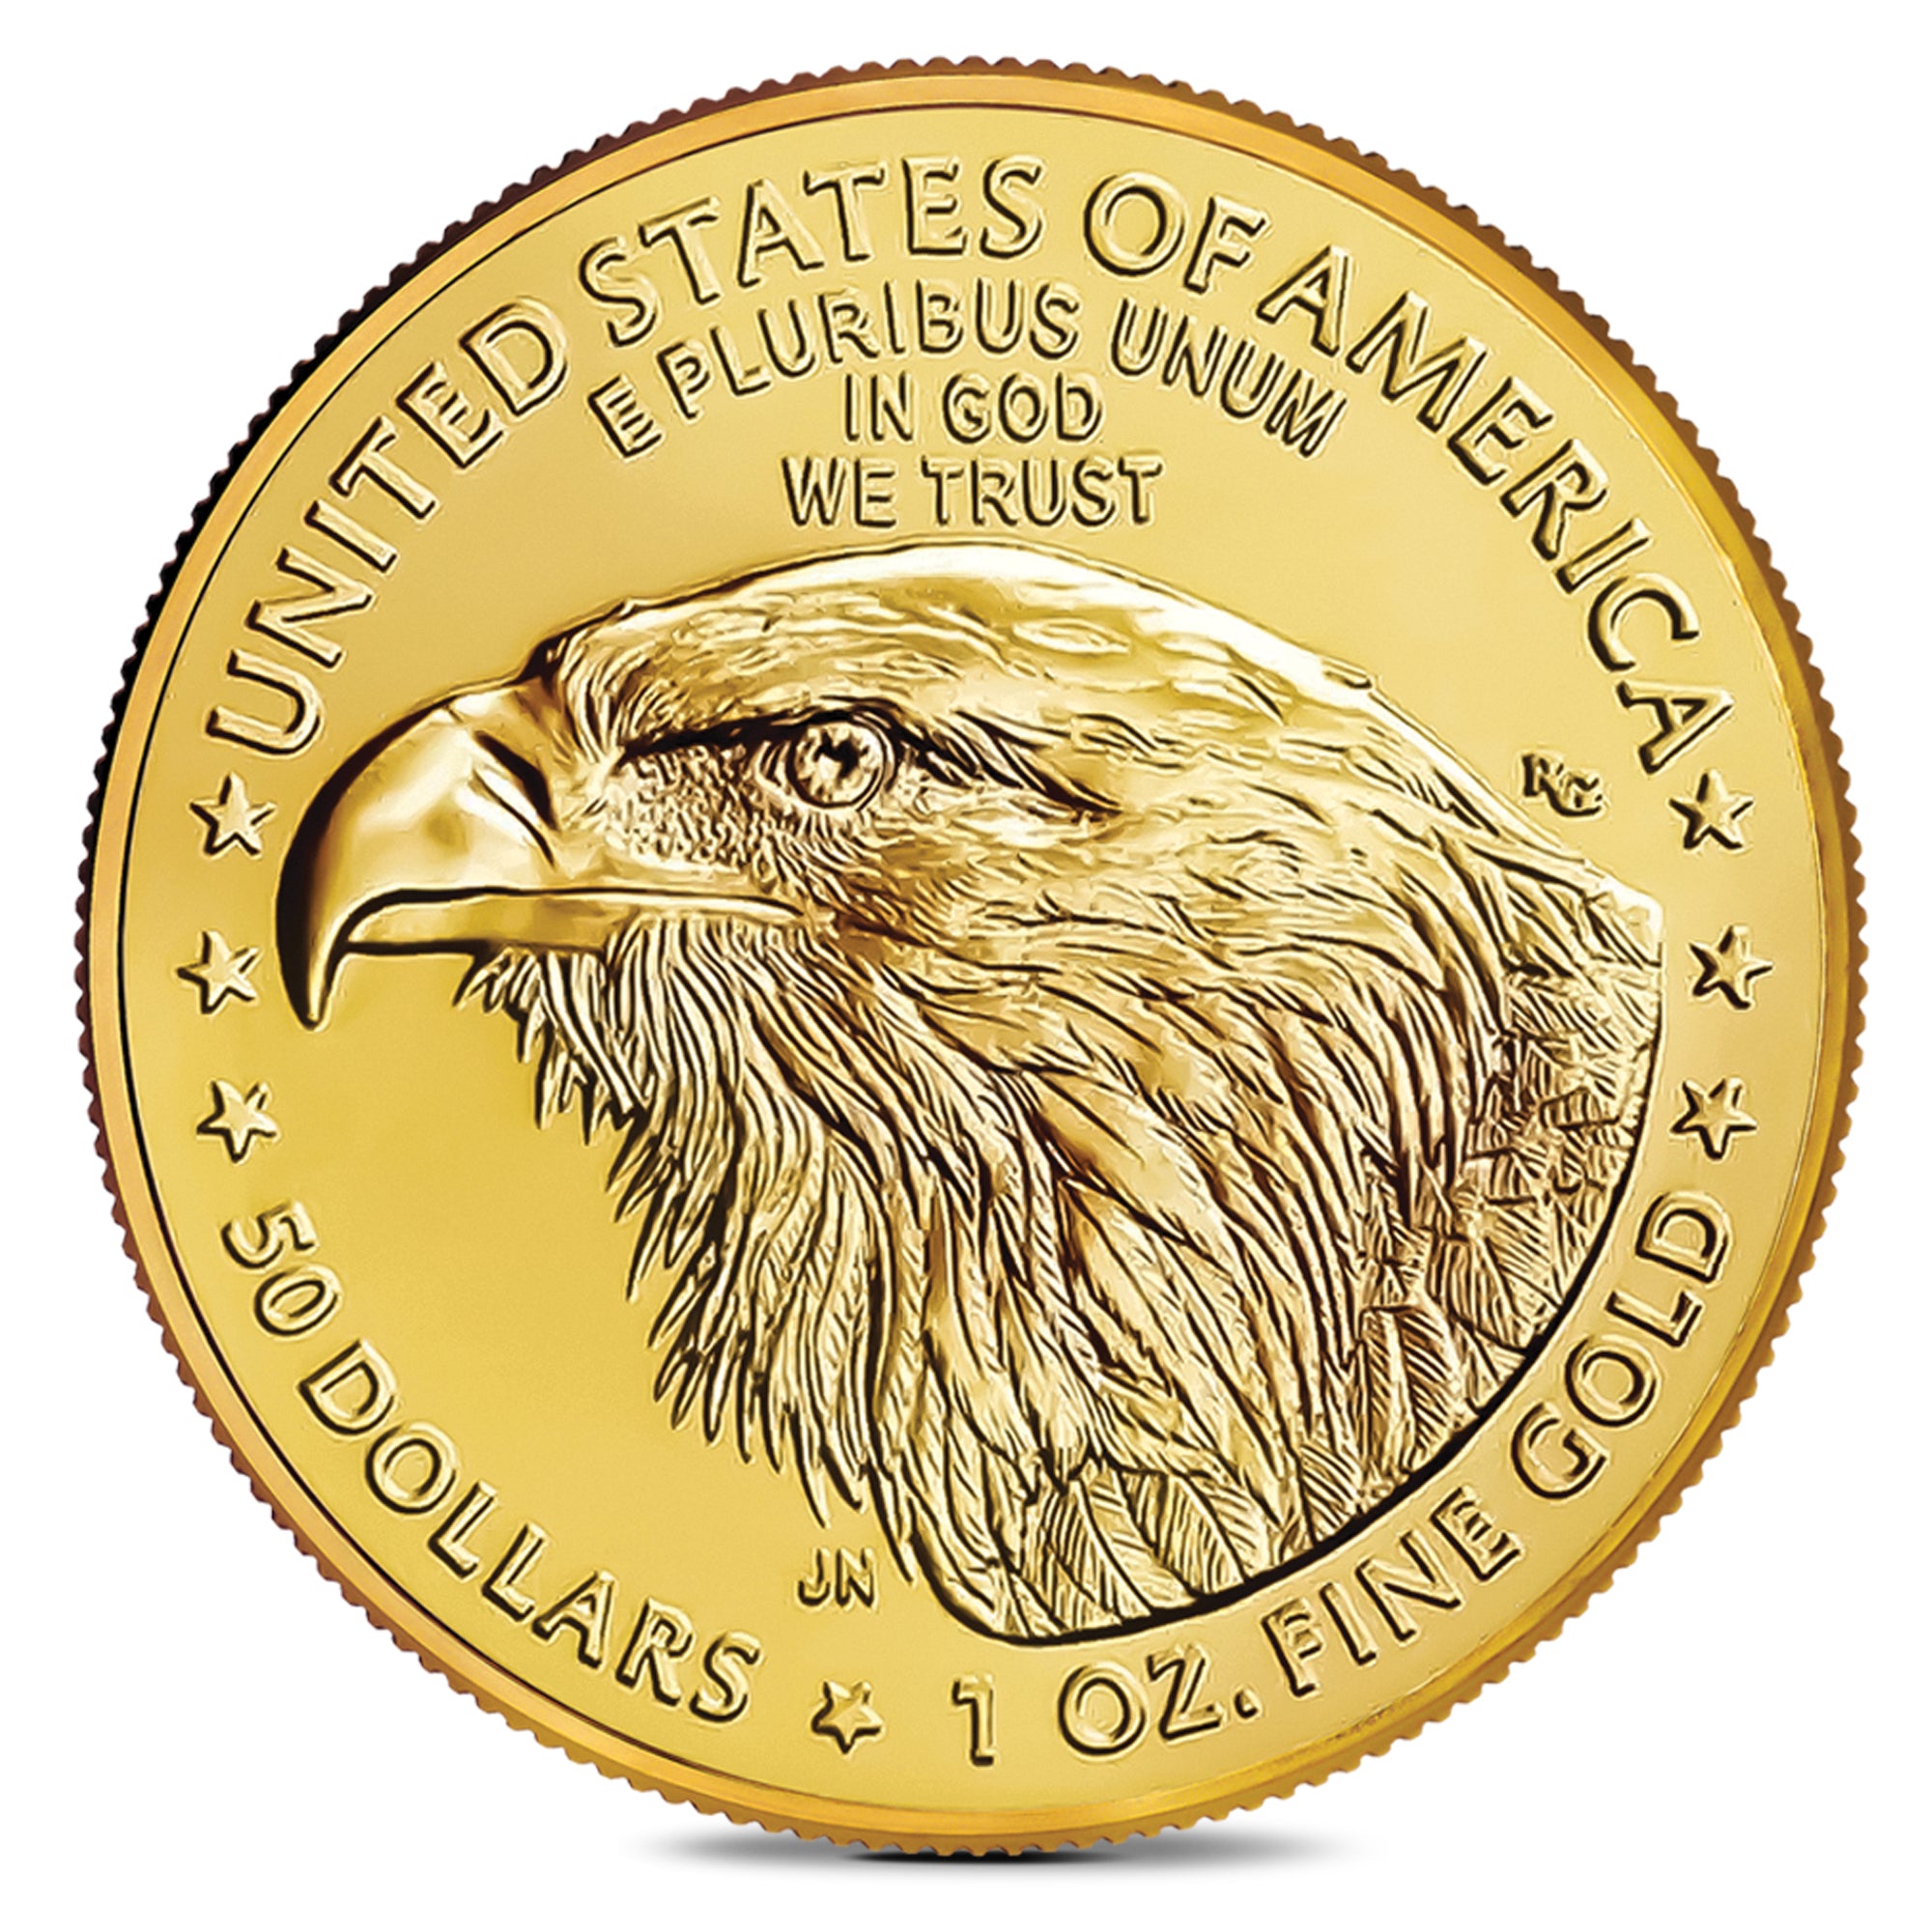 $50 1 oz GOLD AMERICAN EAGLES   AT COST